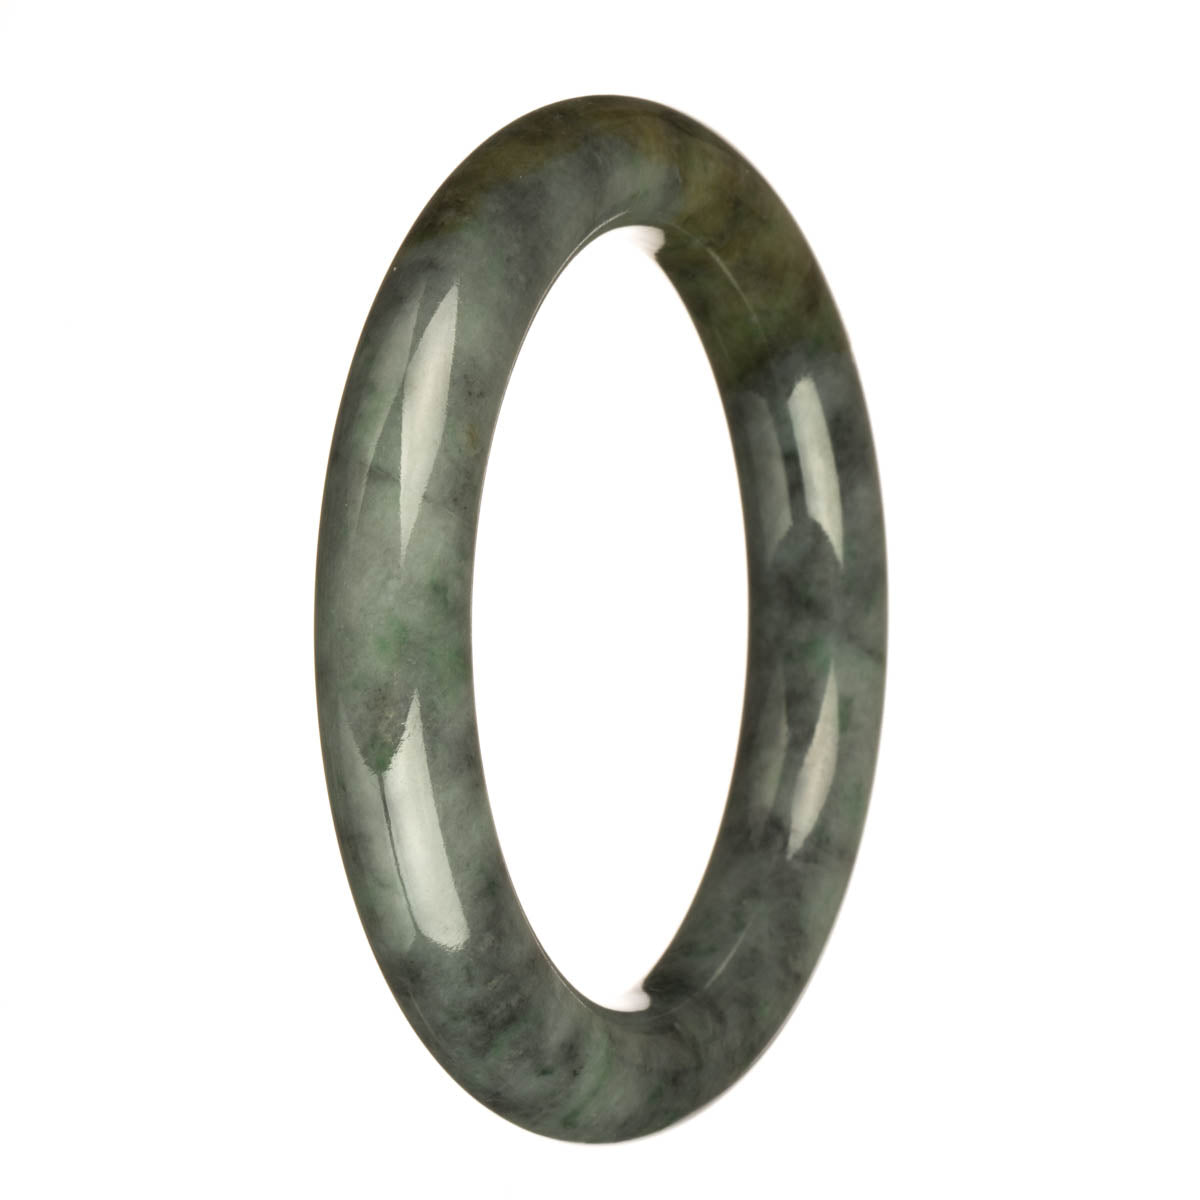 Authentic Grade A Grey with Apple Green, Brown, and Grey Patterns Burma Jade Bangle Bracelet - 61mm Round